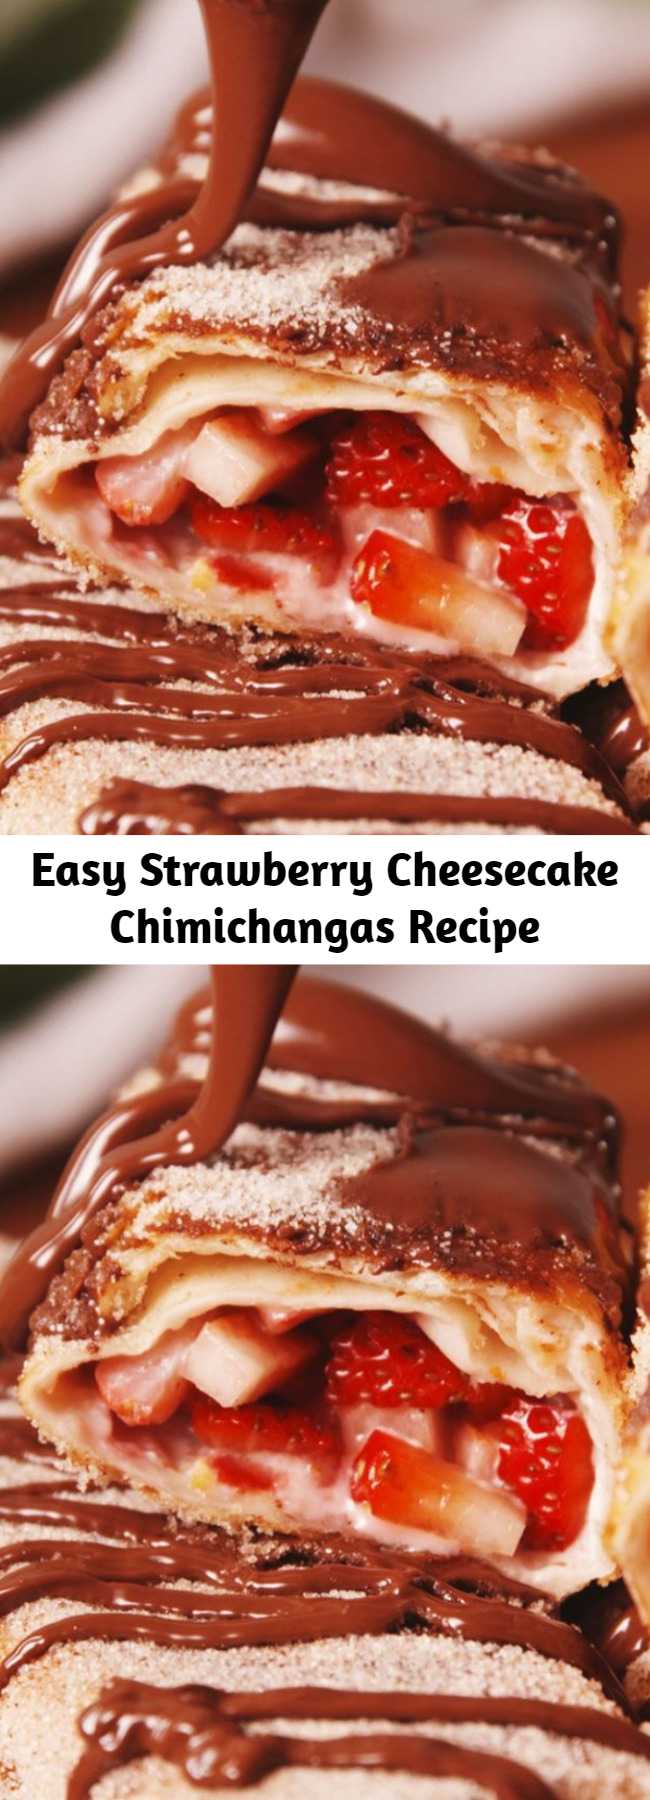 Easy Strawberry Cheesecake Chimichangas Recipe - Check out this easy recipe for the best strawberry cheesecake chimichangas! Our new favorite way to eat cheesecake.